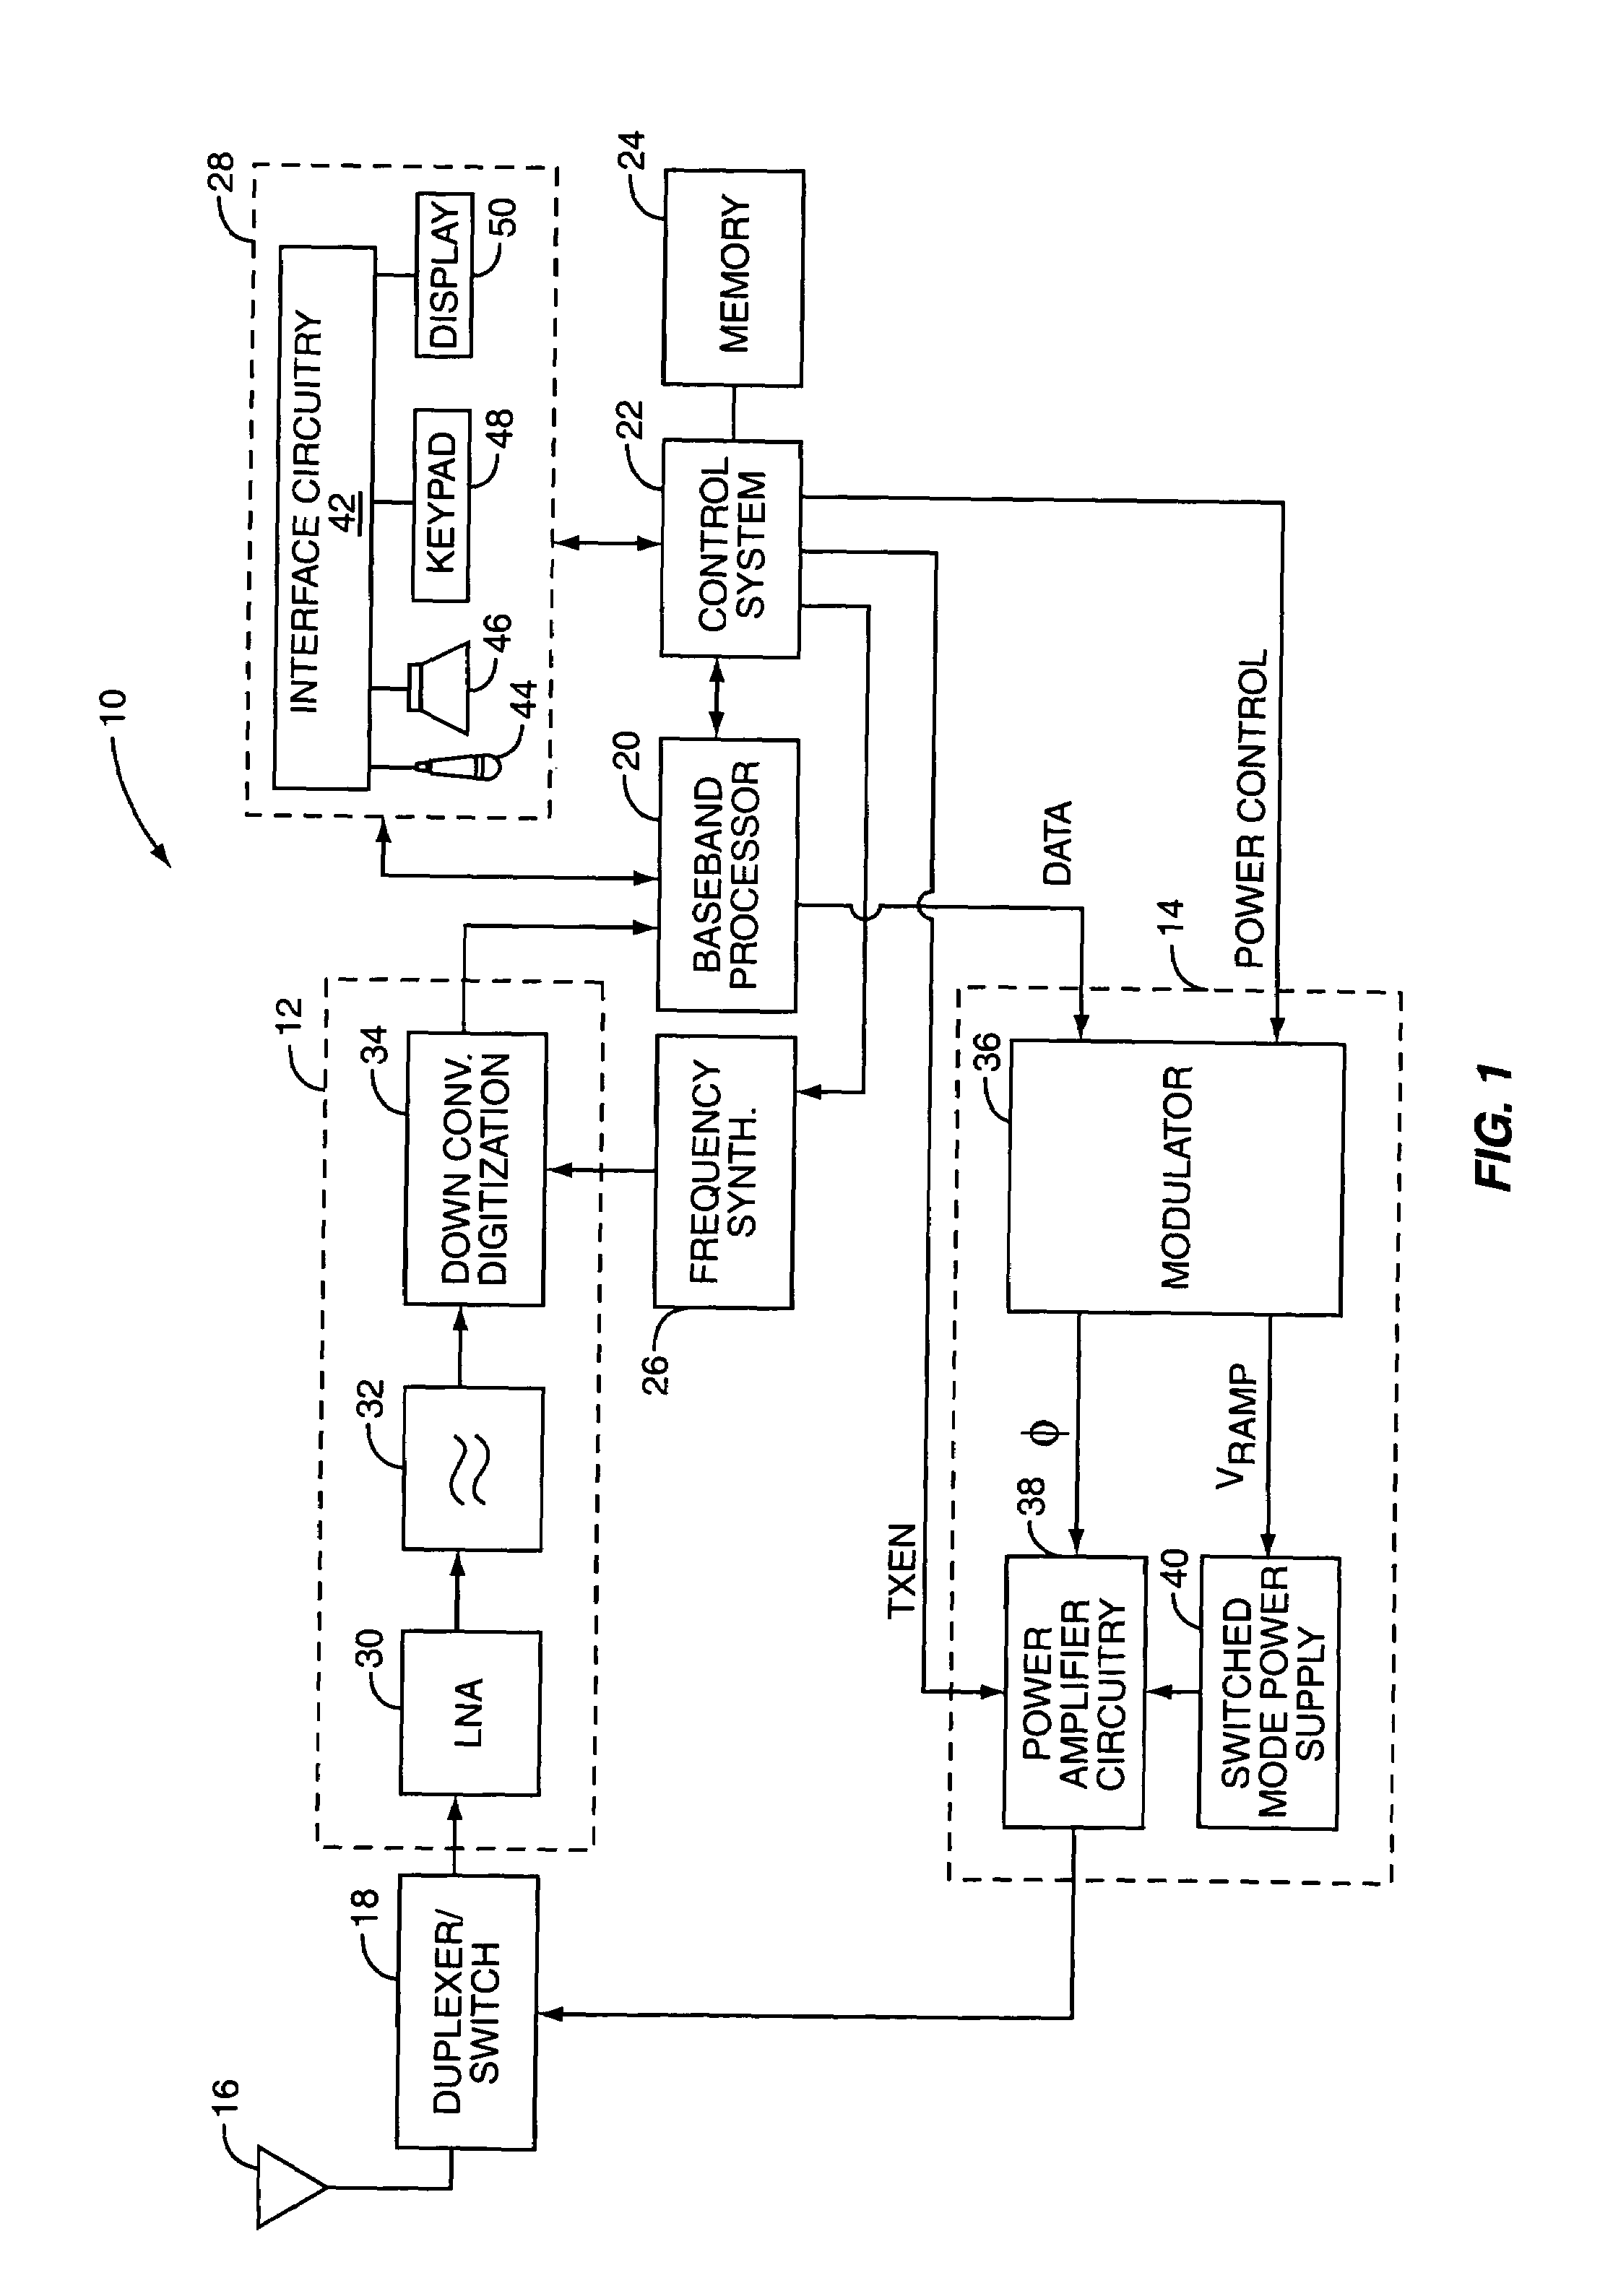 Active ripple reduction switched mode power supplies